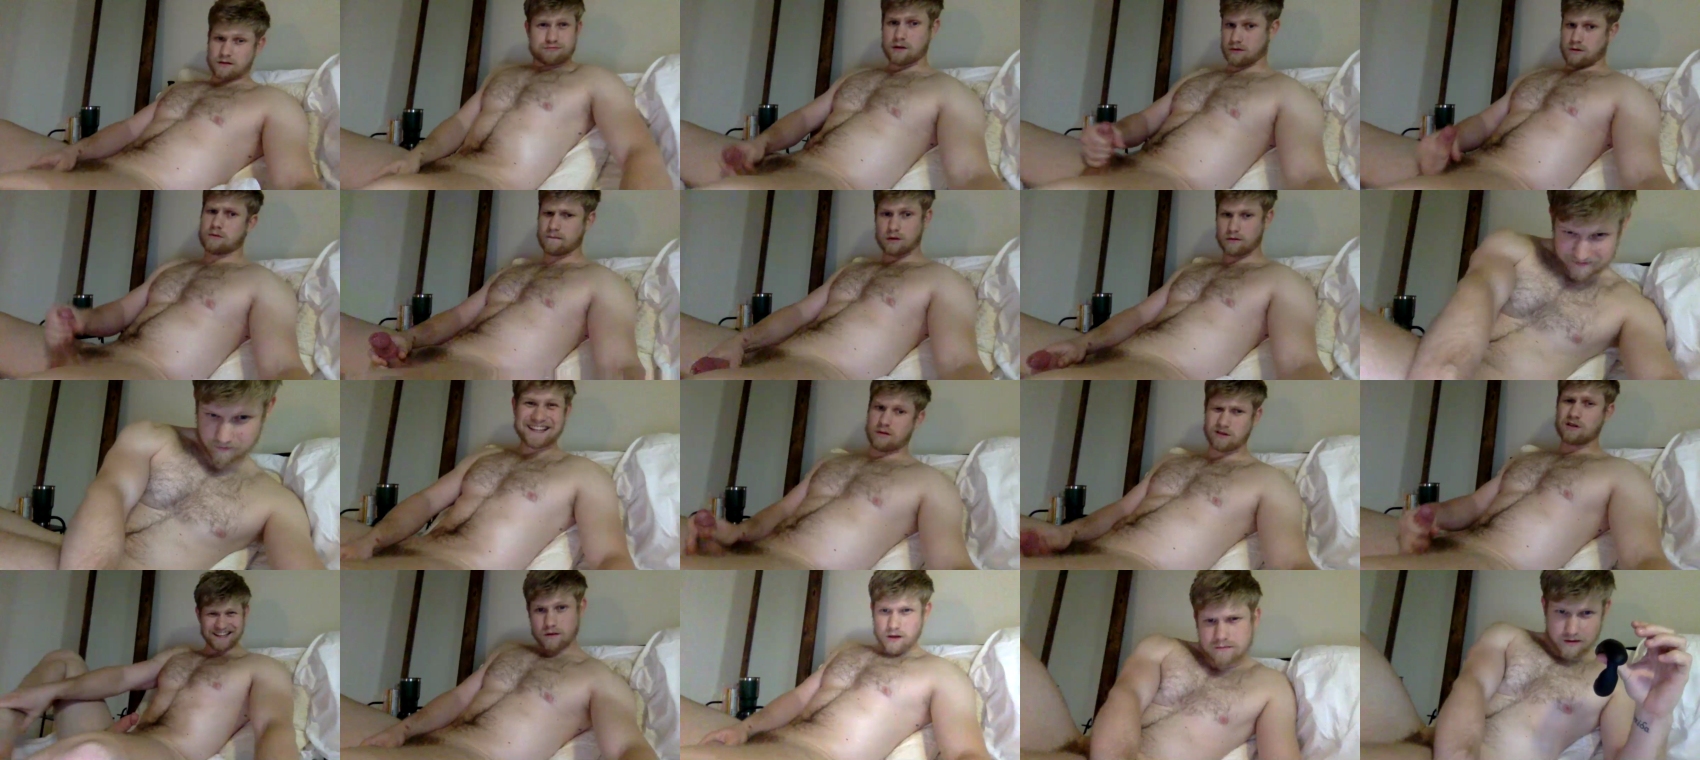 thehairyprince  23-02-2022 video ass